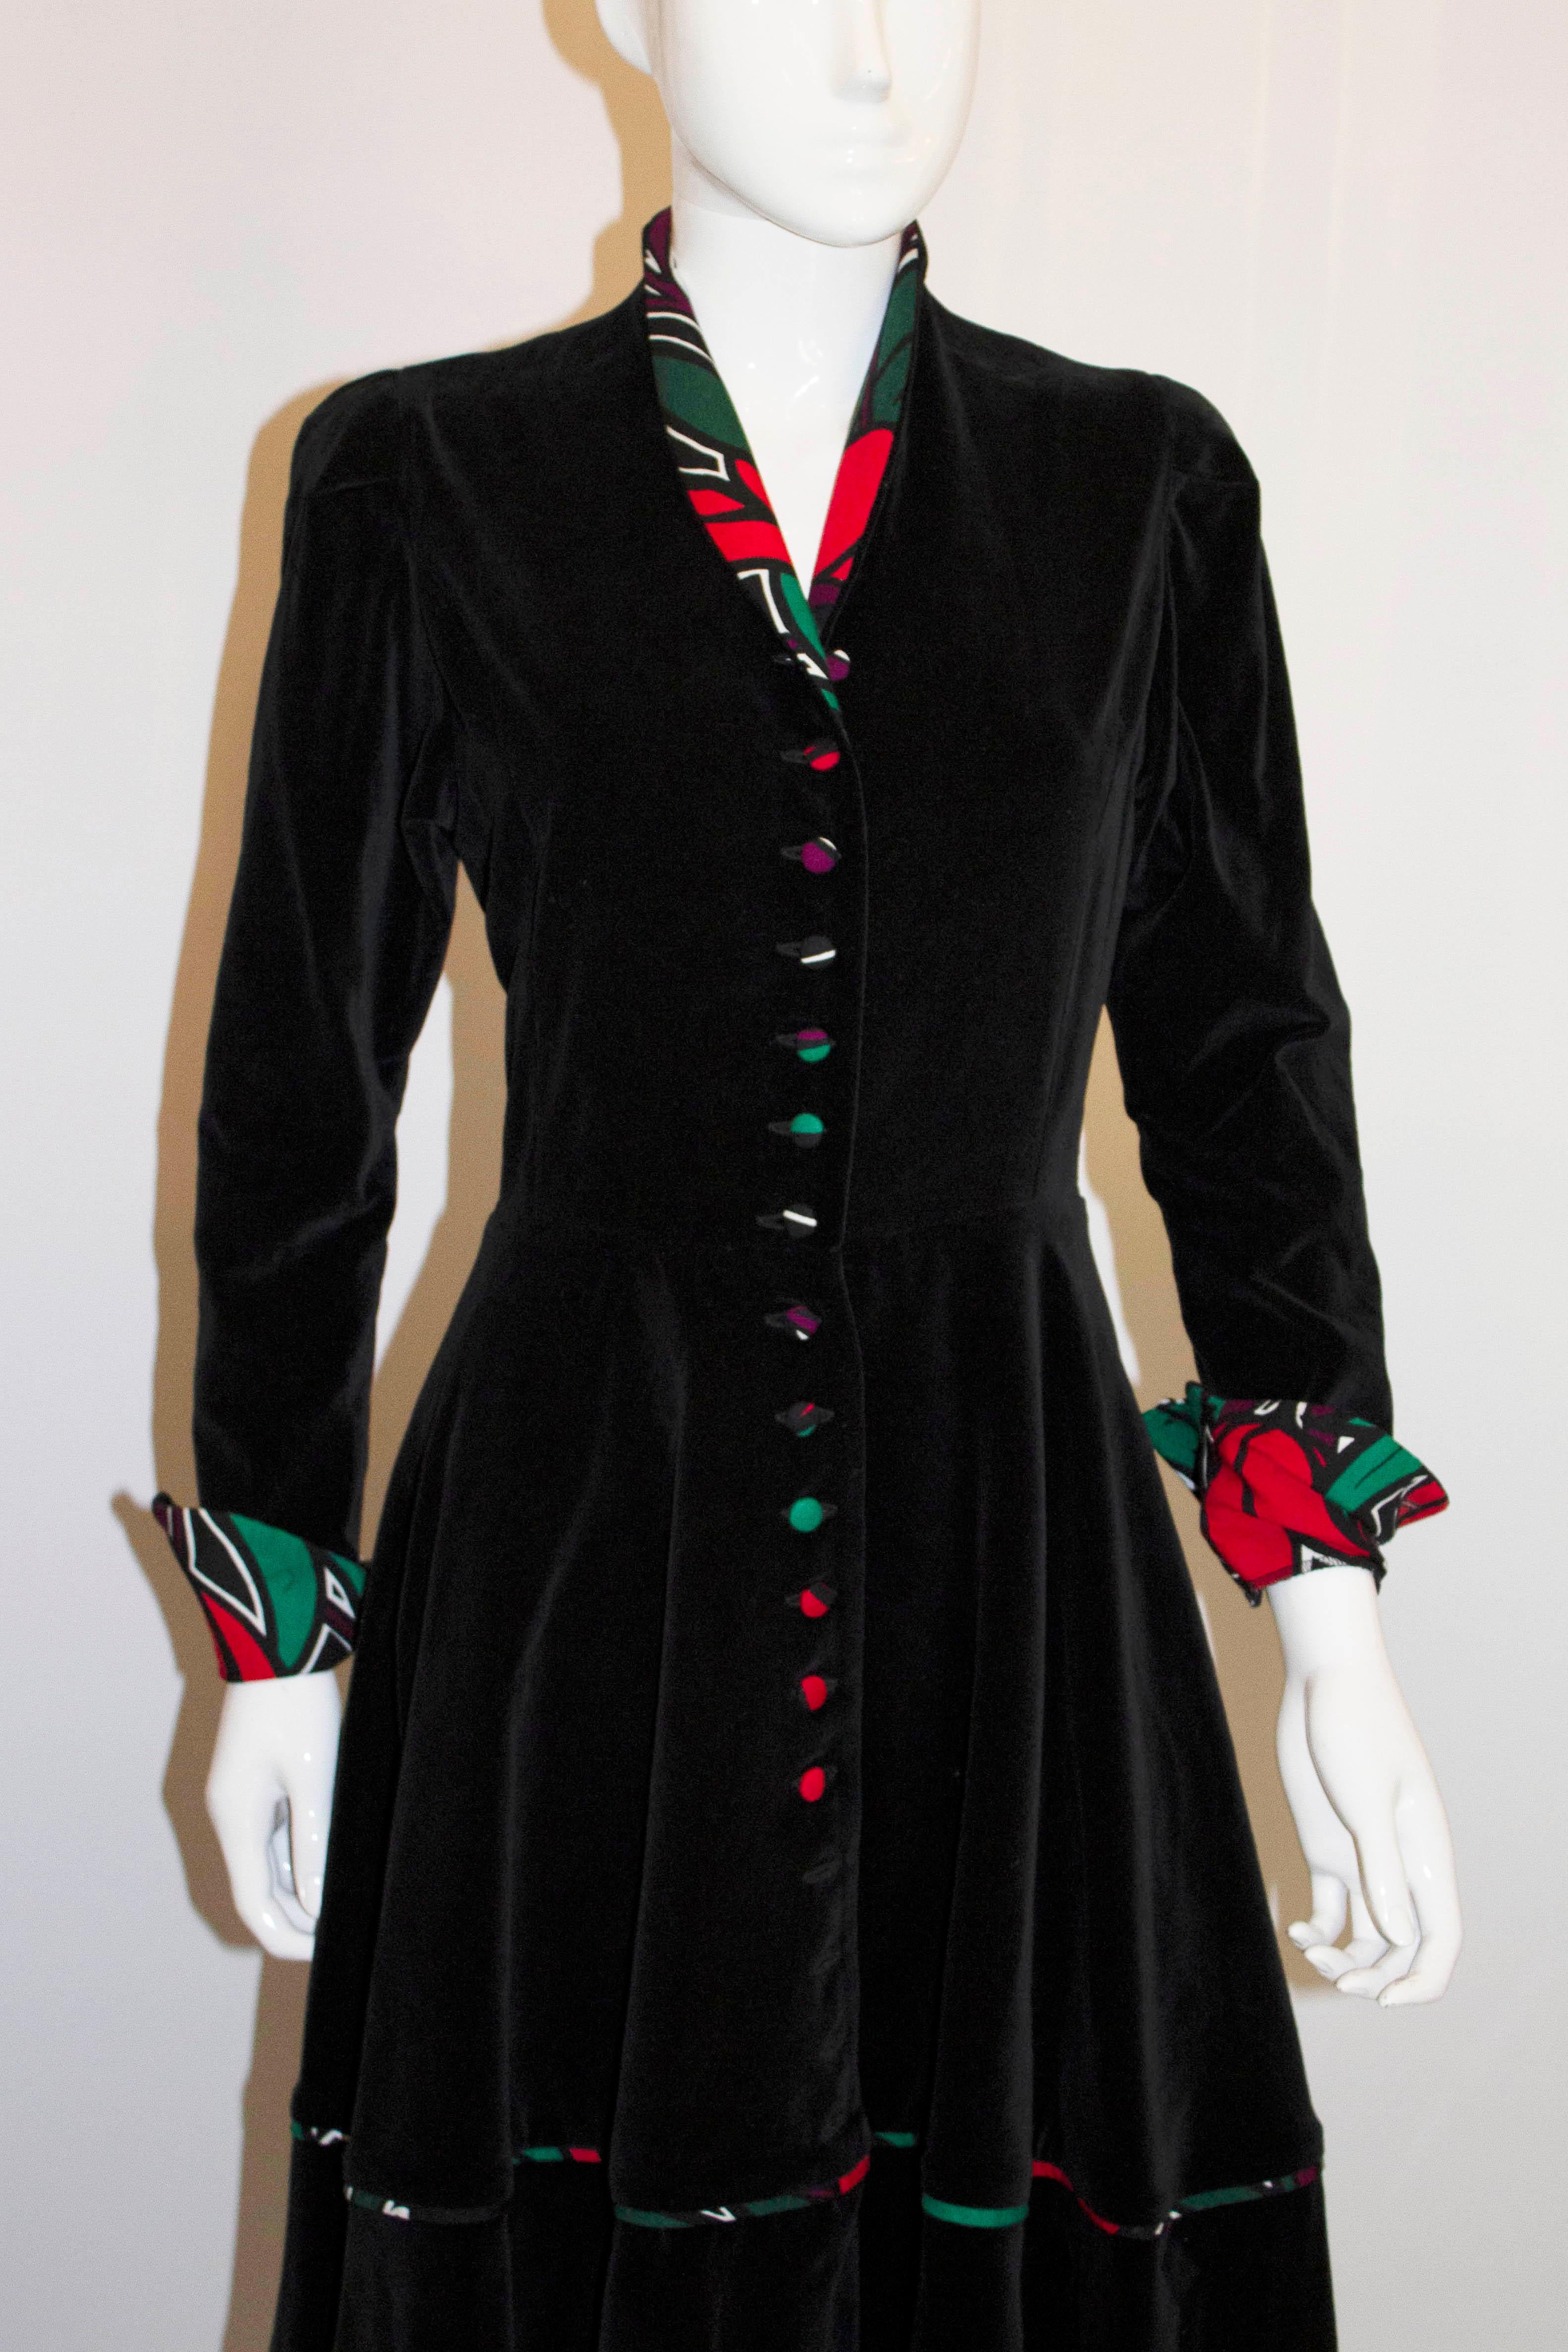 A stunning vintage dress by Angela Holmes for Droopy and Browns. In black velvet with wonderful buttons and lining, the dress has a shawl collar, front button opening and great lining. The buttons could be moved 1 1/2'' to create more space!